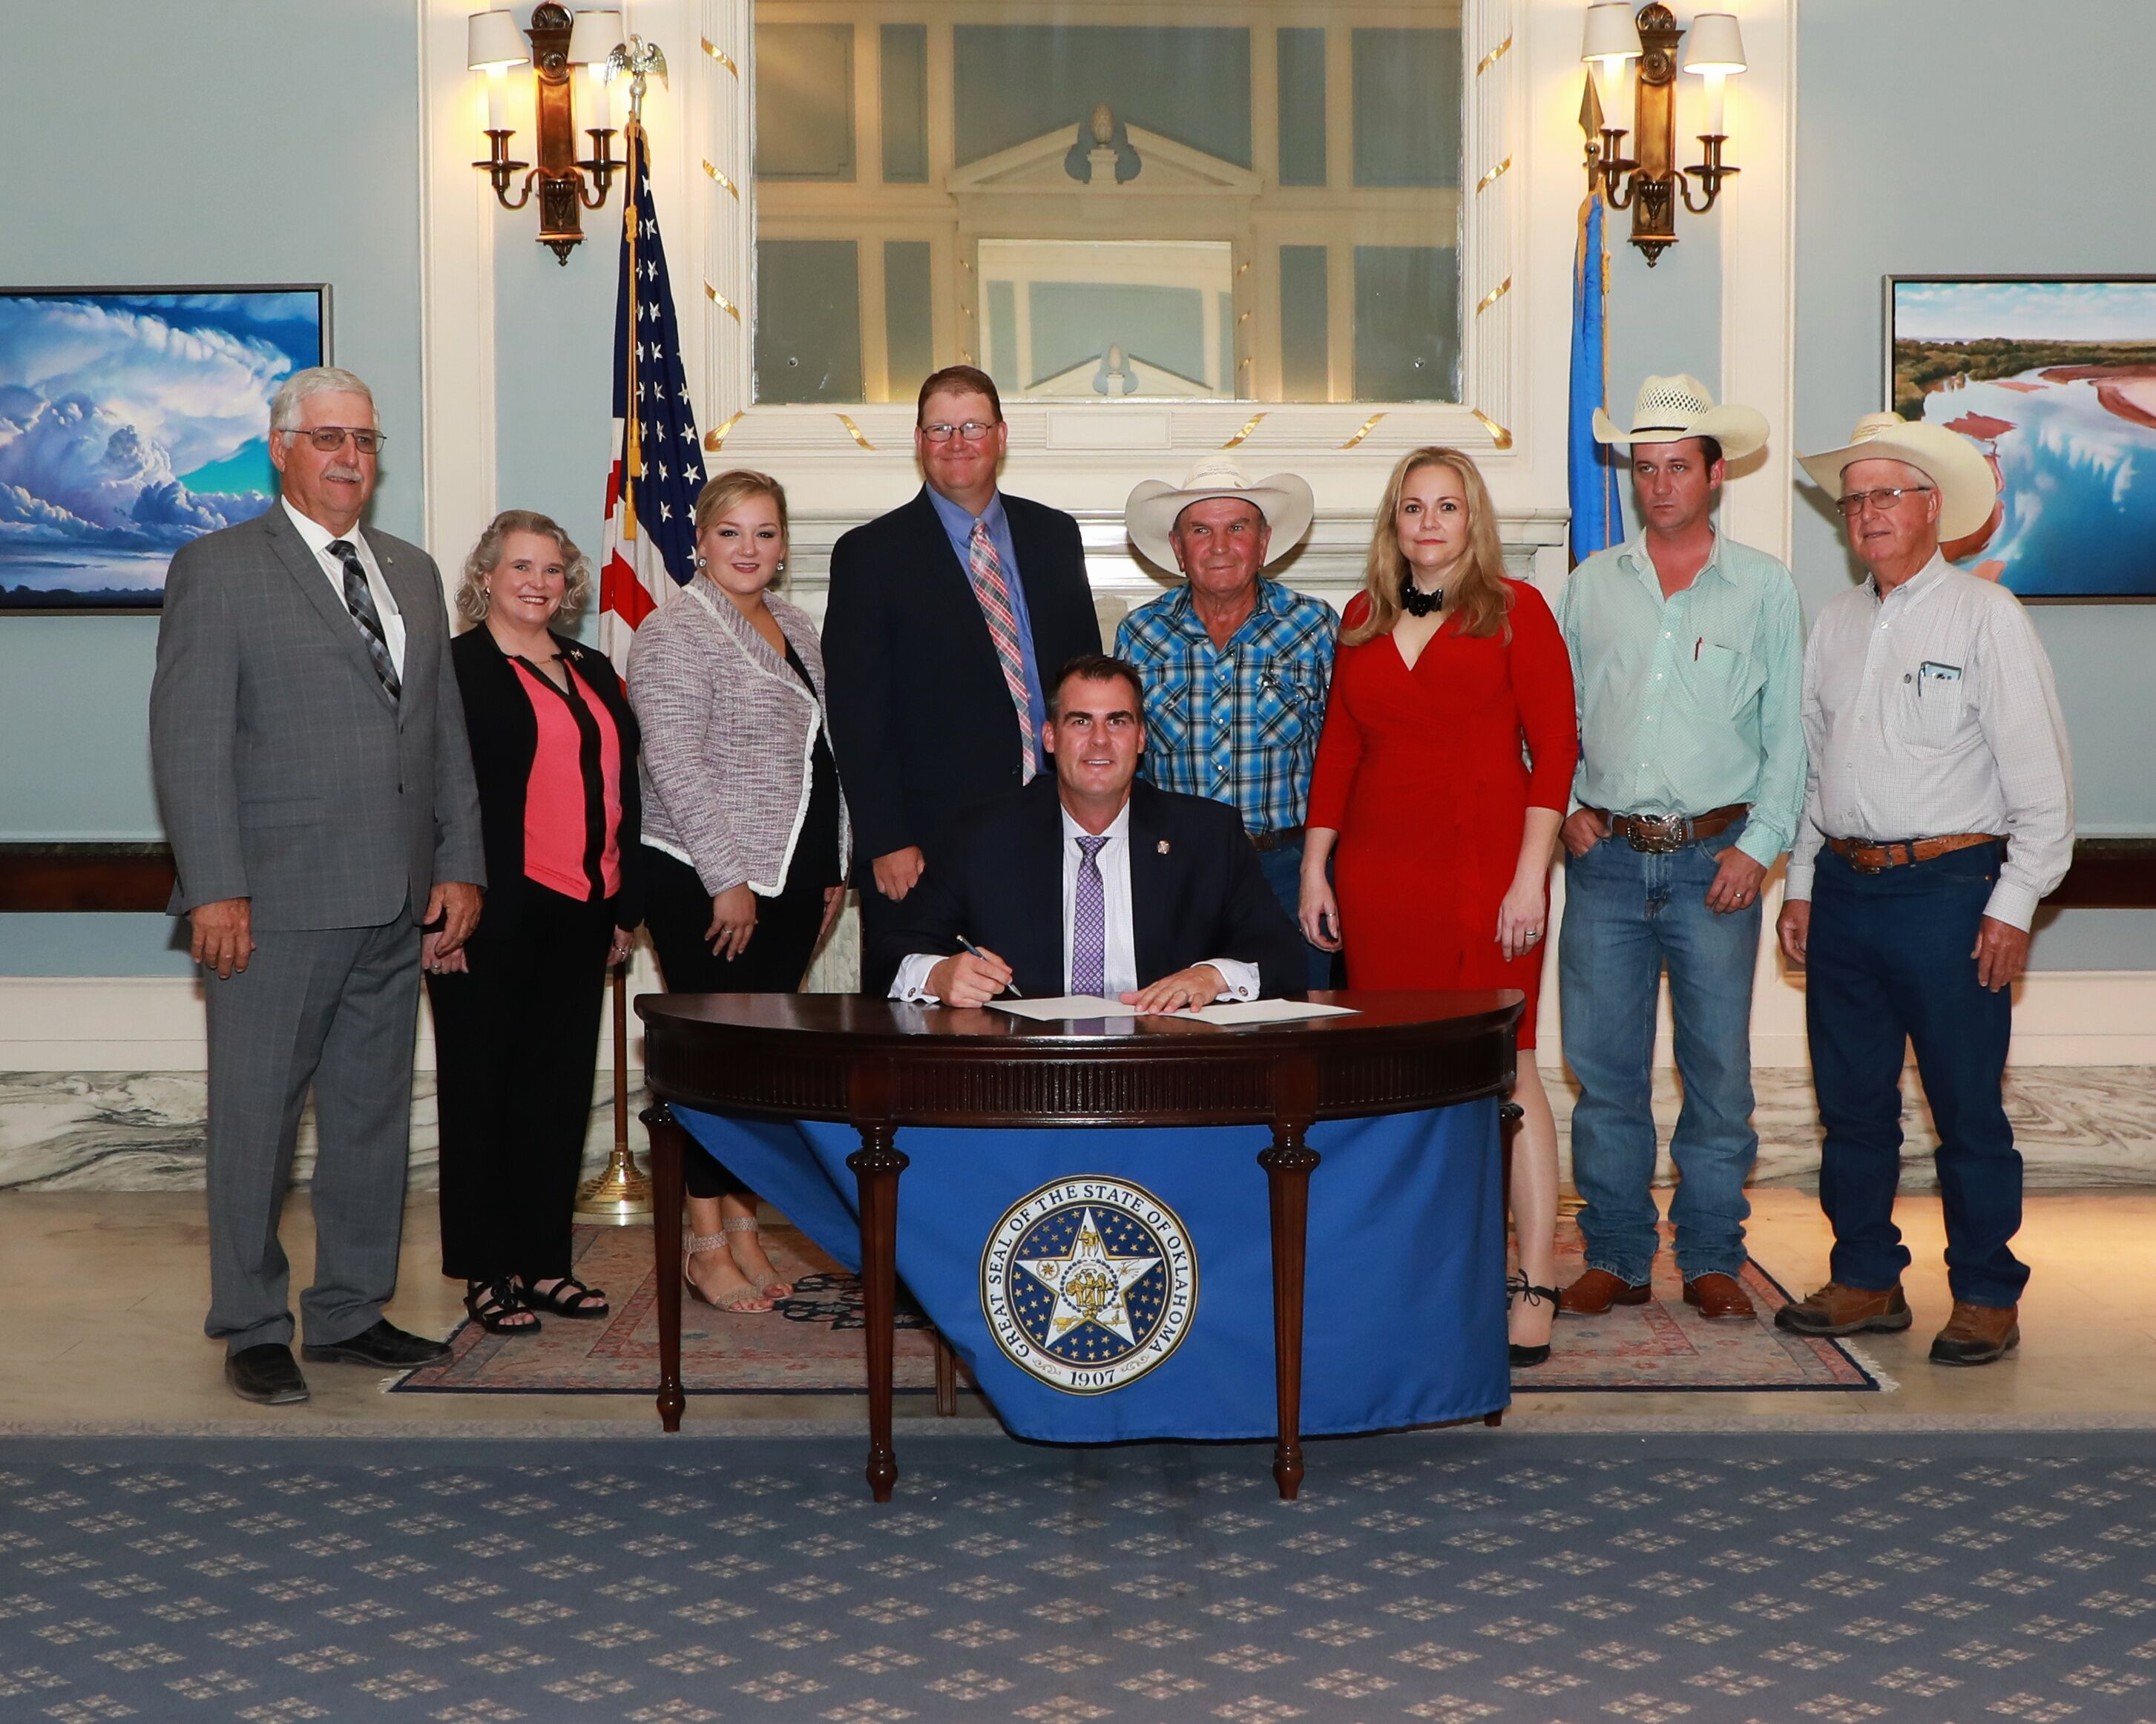 A ceremonial bill signing was also held for SB 543, updating the statutory definition of “feral swine.”  Pictured from left to right are Sen. Roland Pederson, Teena Gunter, Oklahoma Dept. of Agriculture, JanLee Rowlett, Agriculture Department, Jeramy Rich, lobbyist, Dale Toon, Wild Boar Ridge Hunting Ranch owner, Michelle Sutton, lobbyist, Kane Webb, rancher, Bryan Rickman, heritage hog rancher, and Gov. Kevin Stitt, seated.